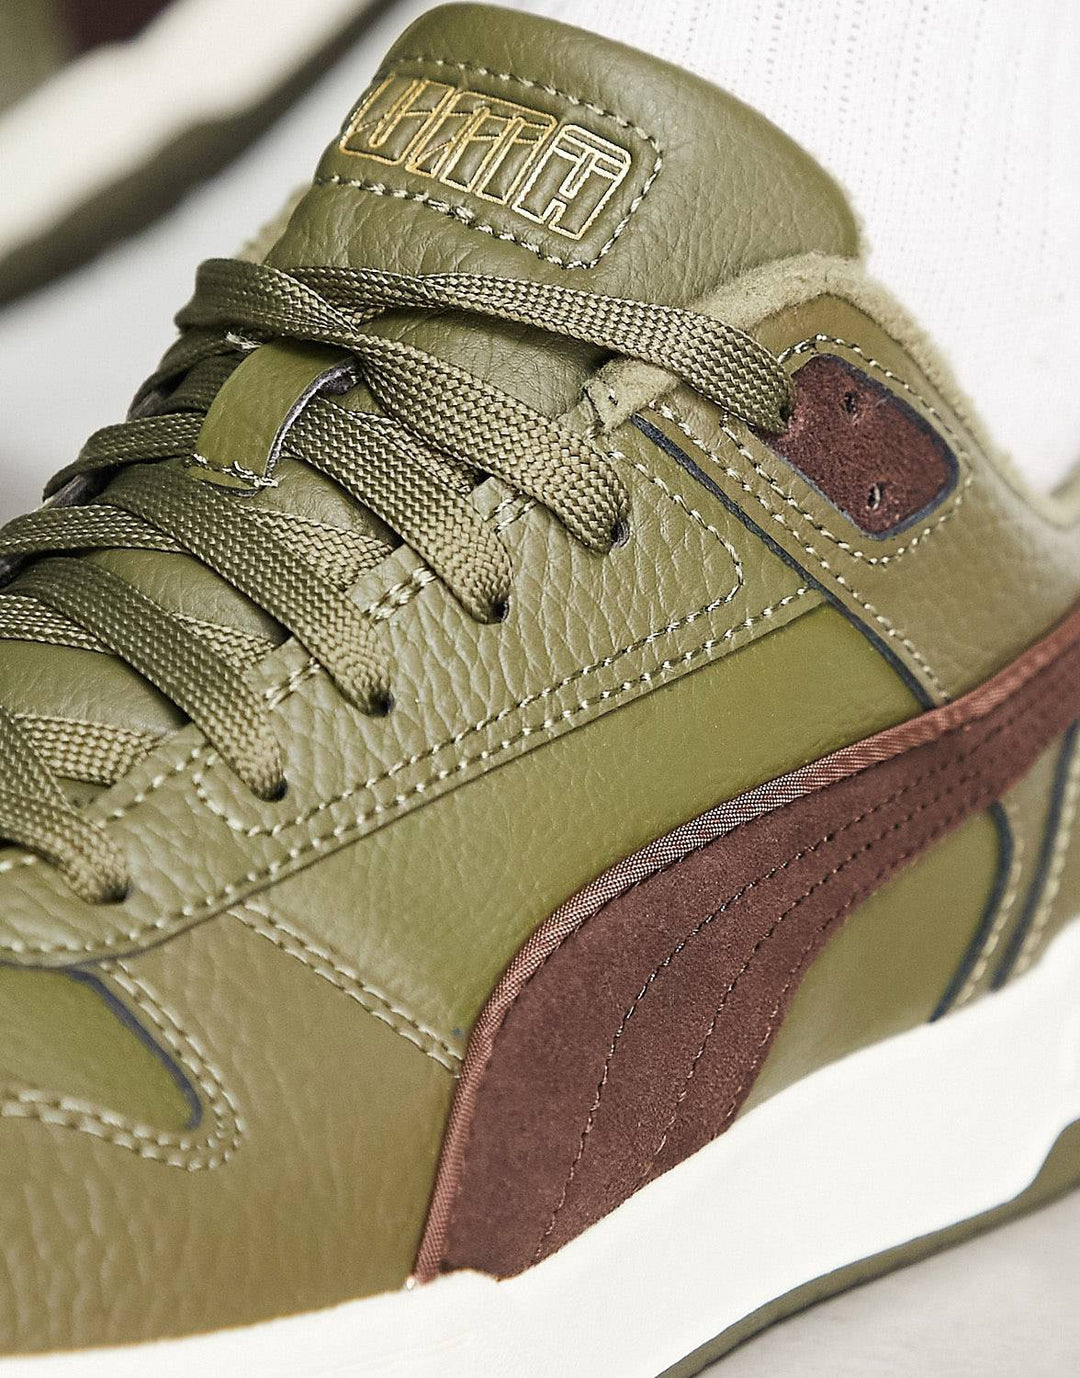 Puma game low trainers in deep olive